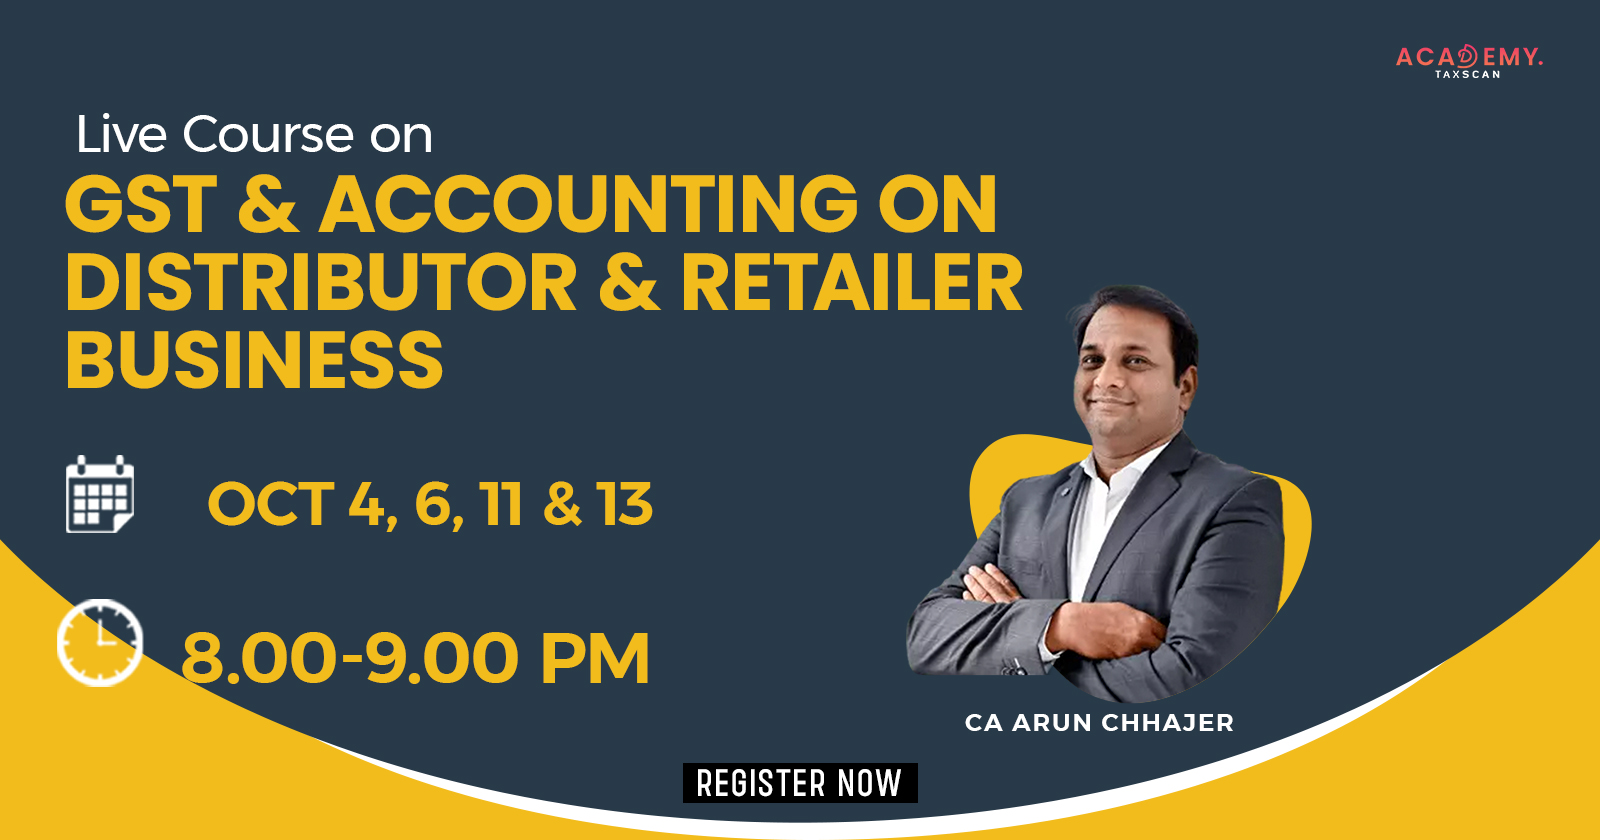 Live Course - GST - Accounting - GST and Accounting on Distributor and Retailer Business - Distributor - Retailer Business - Retailer - Business - Taxscan Academy